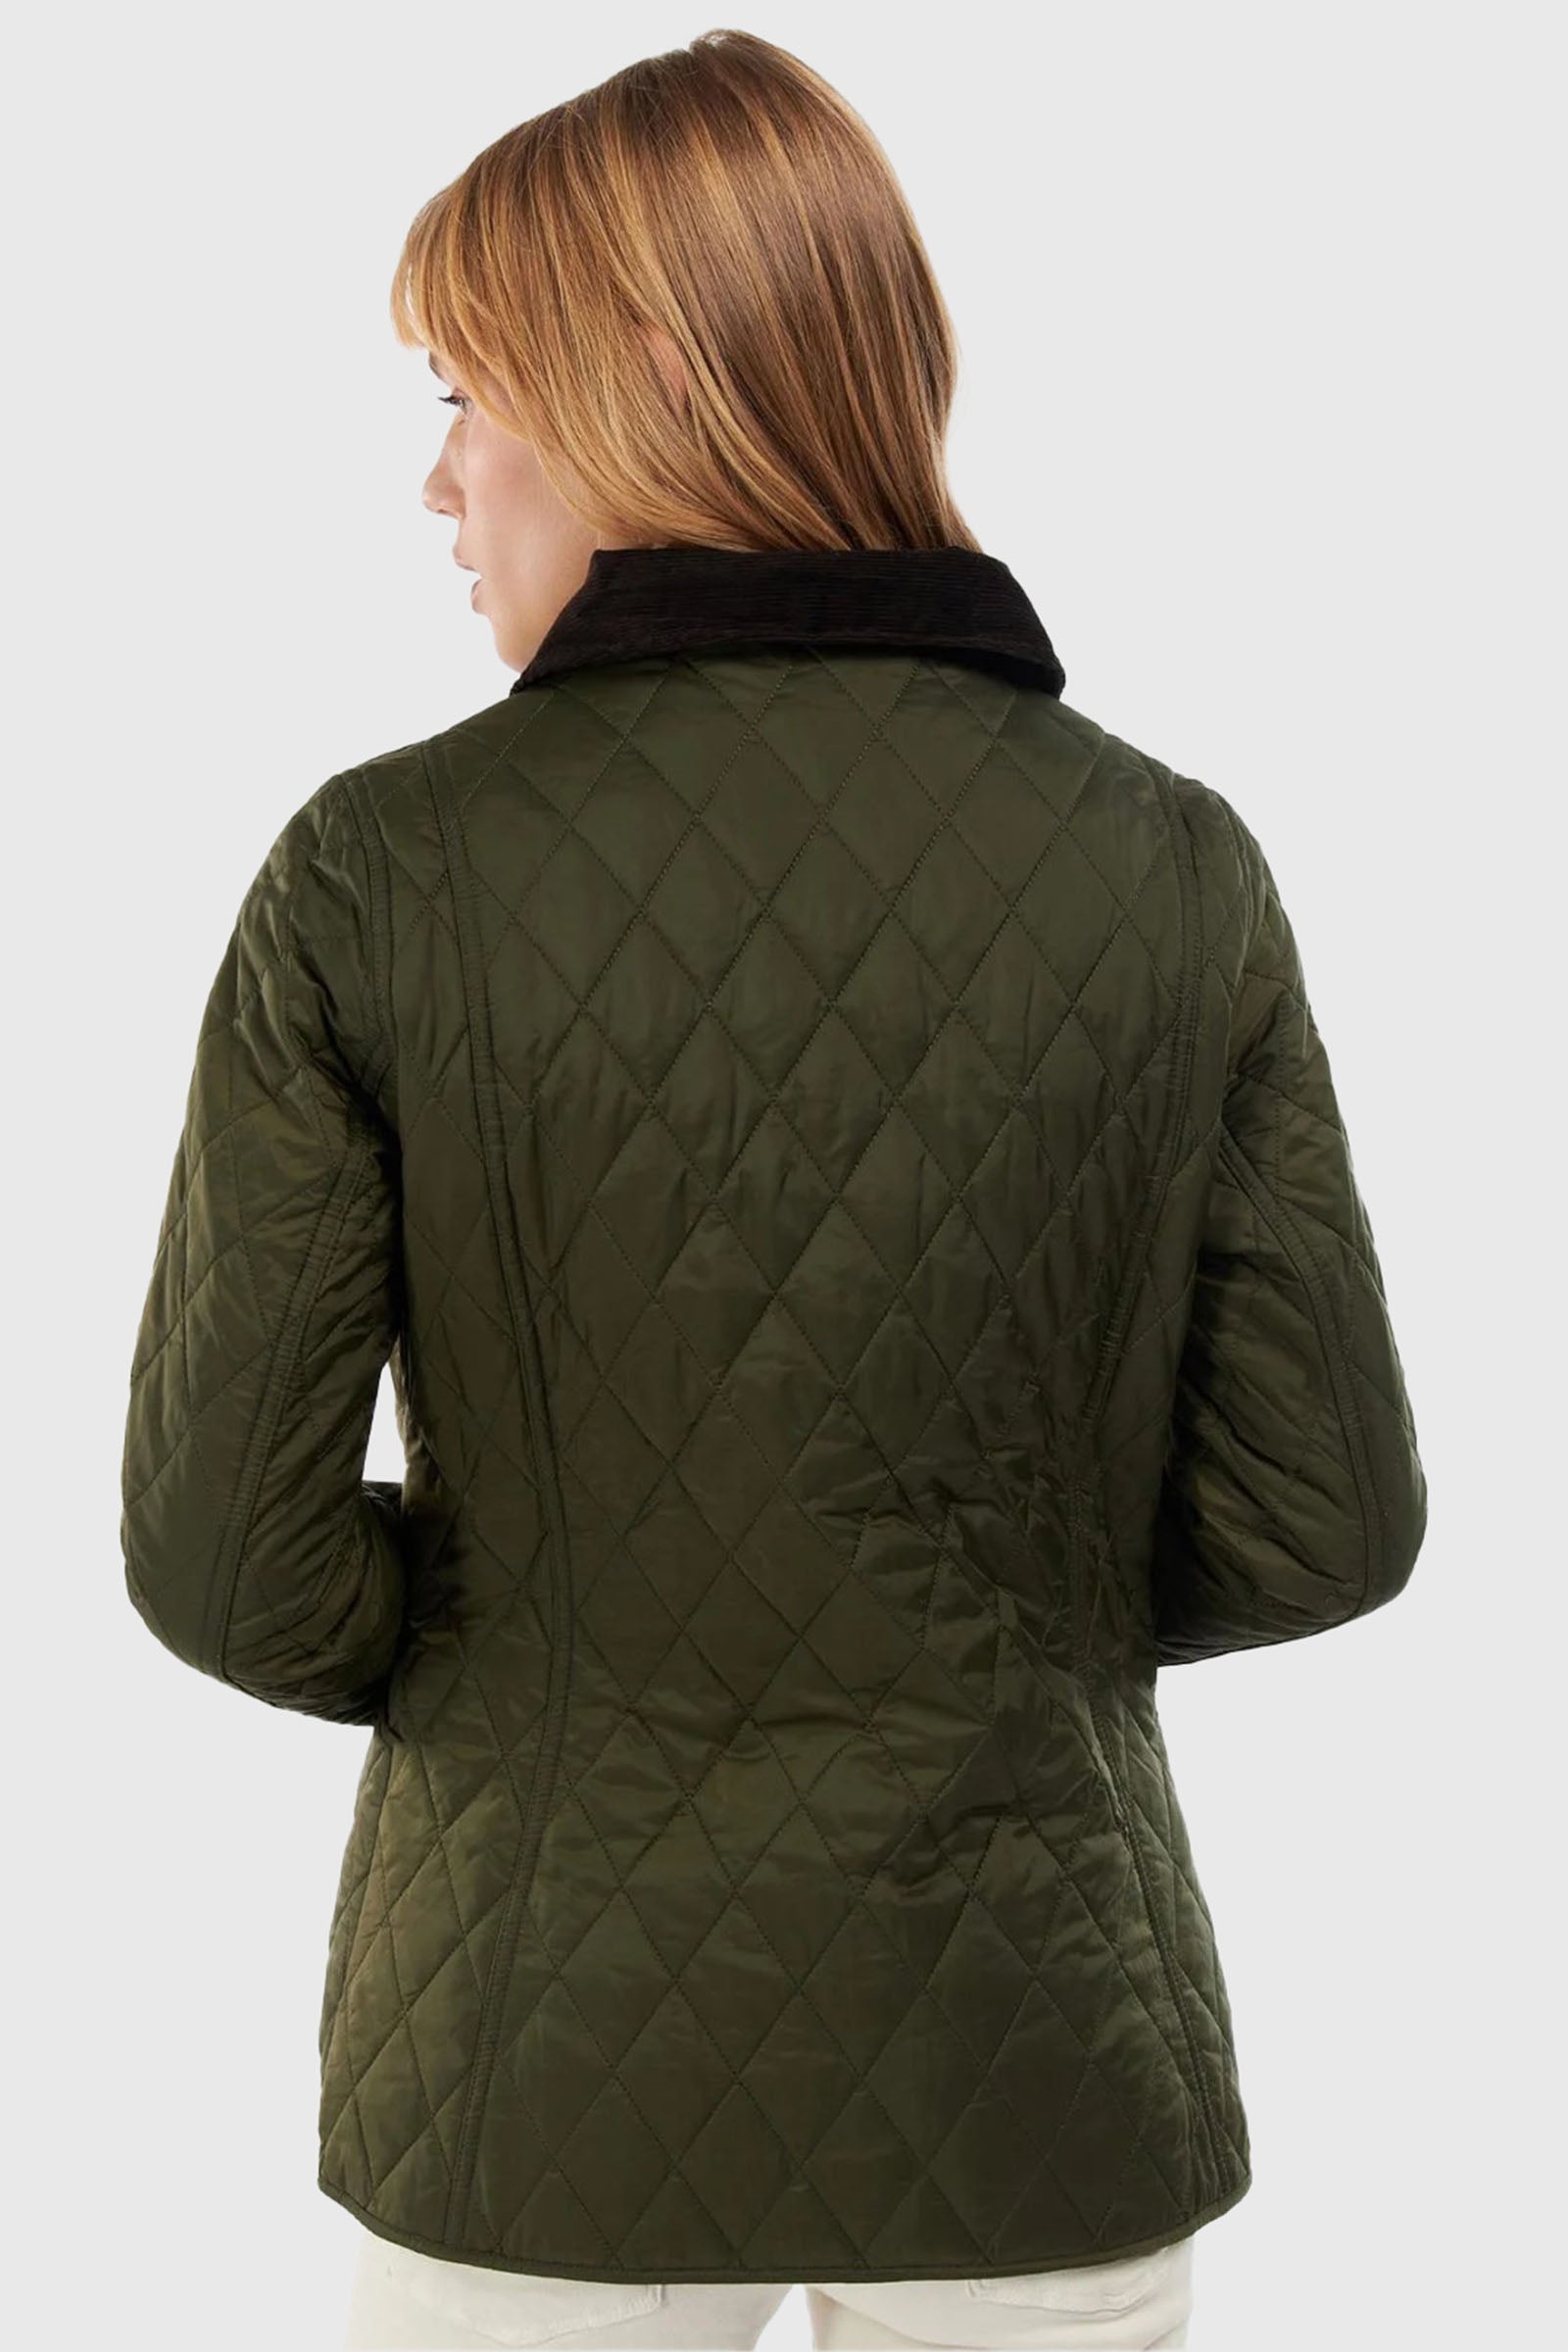 Barbour Giacca Trapuntata Annandale  Verde Oliva - 3